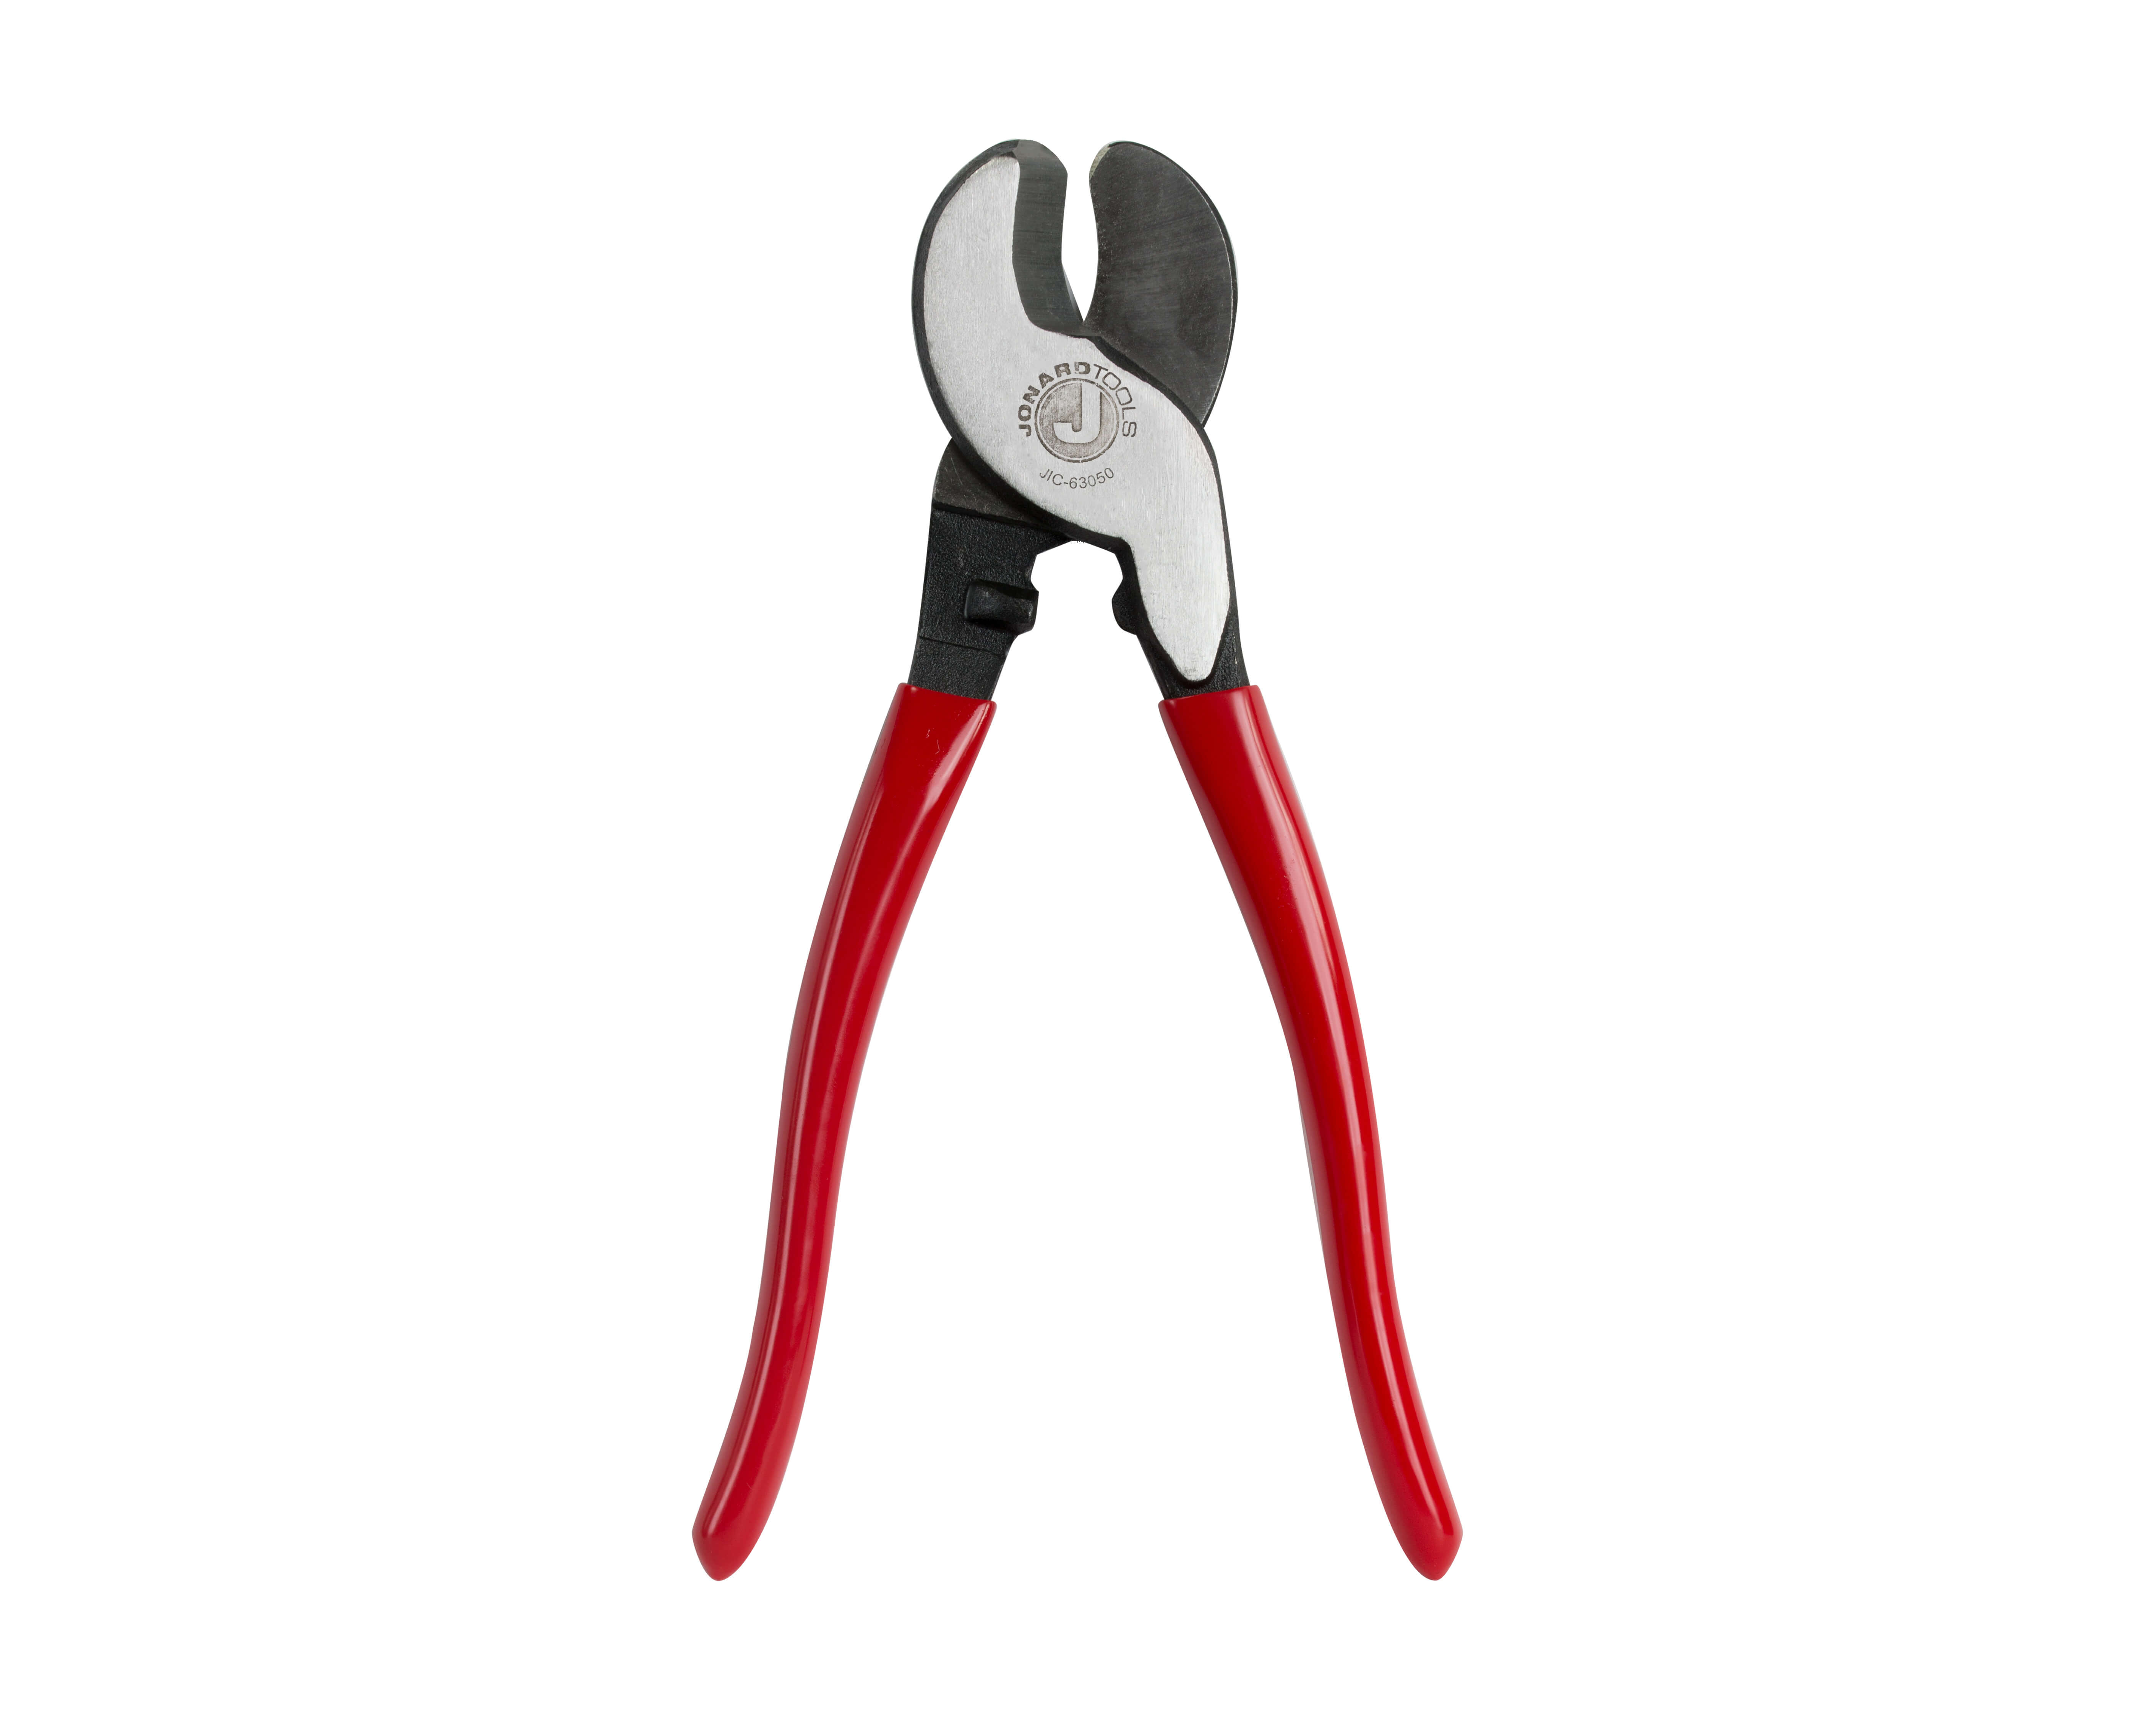 Foarfece si cuttere - High Leverage Cable Cutter, pro-networking.ro